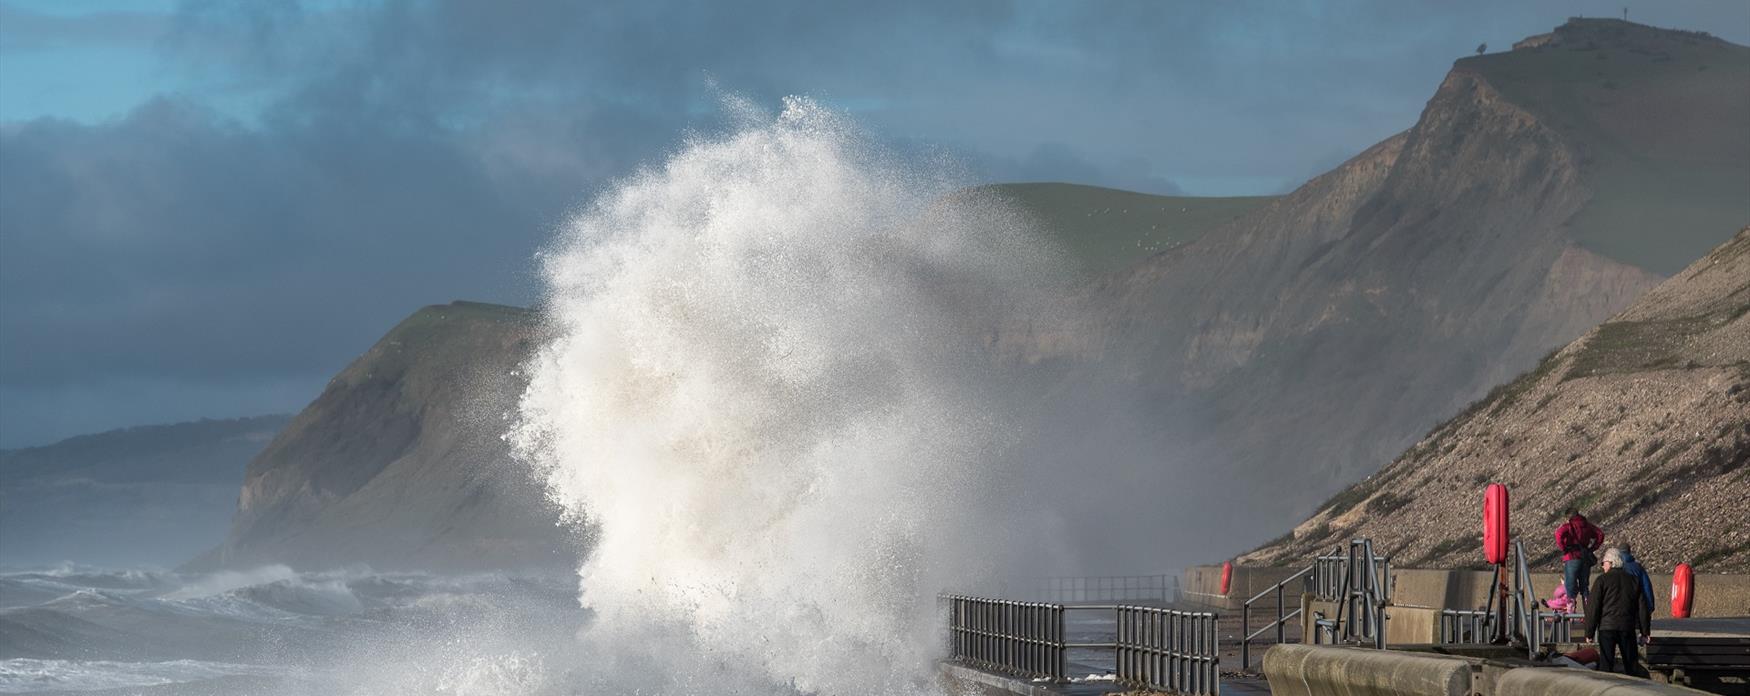 Stormy seas at West Bay